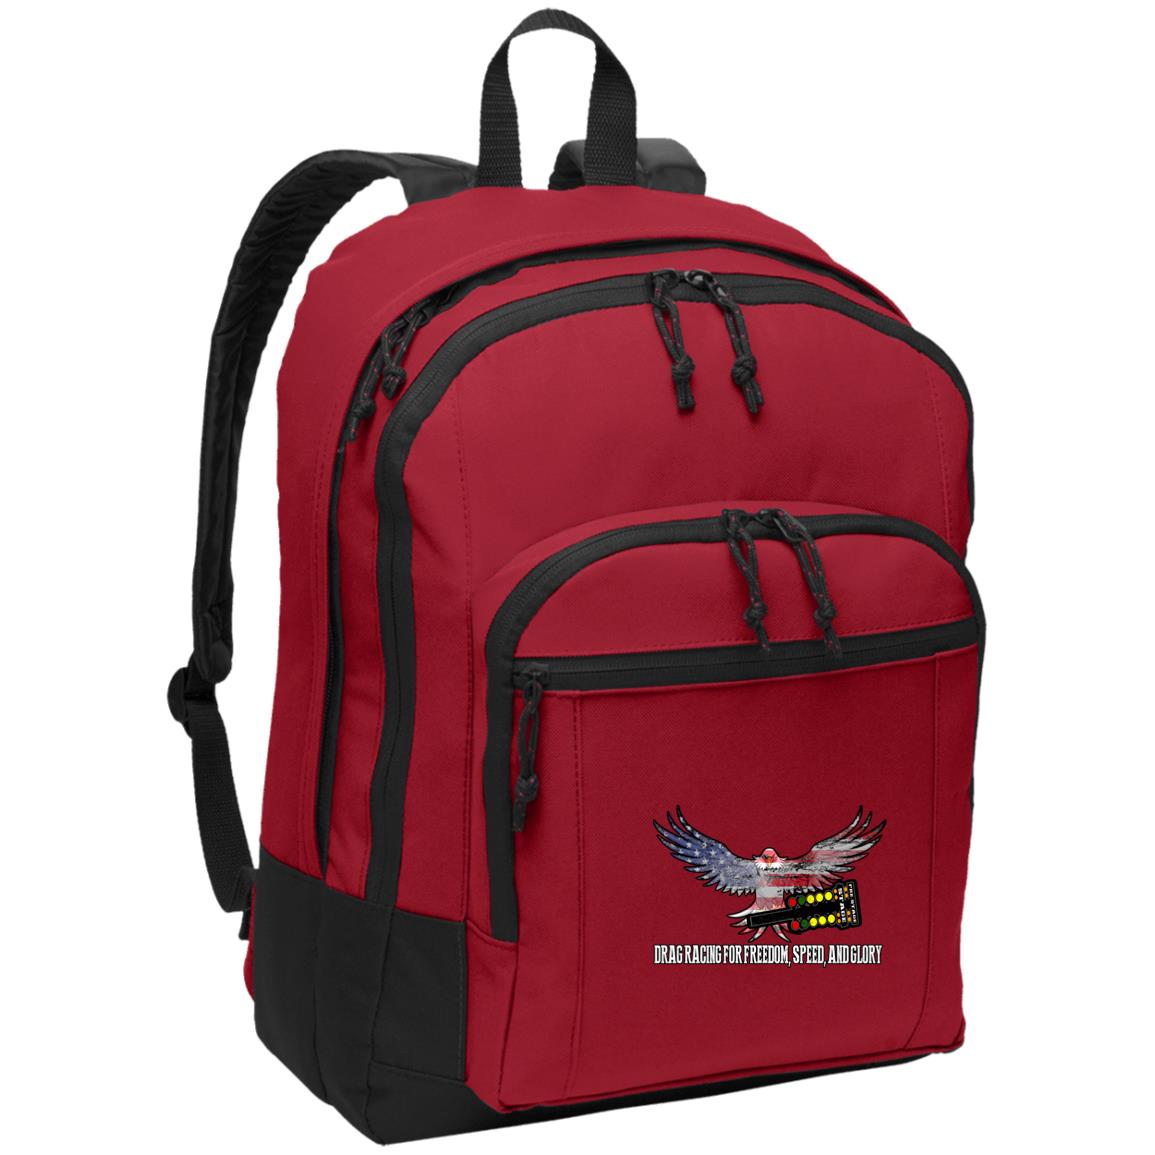 Drag Racing for Freedom, Speed, and Glory Basic Backpack